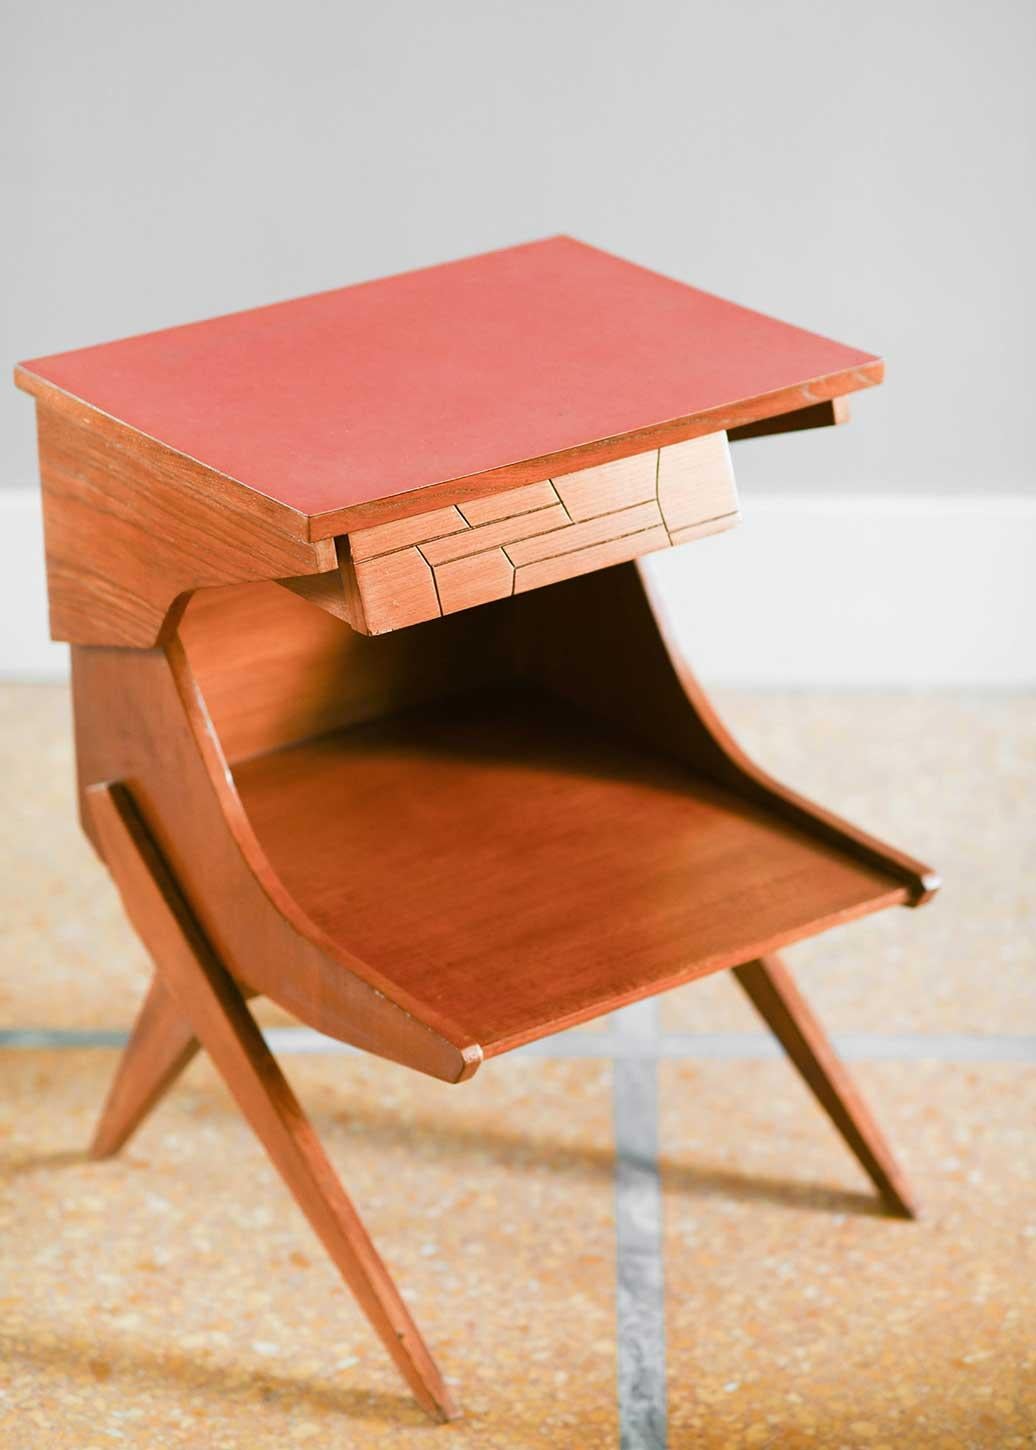 Pair of wooden bedside tables with colored formica top, 1950
Structure in wood and top covered in colored formica
Dimensions: 48 W x 62 H x 48 D cm.